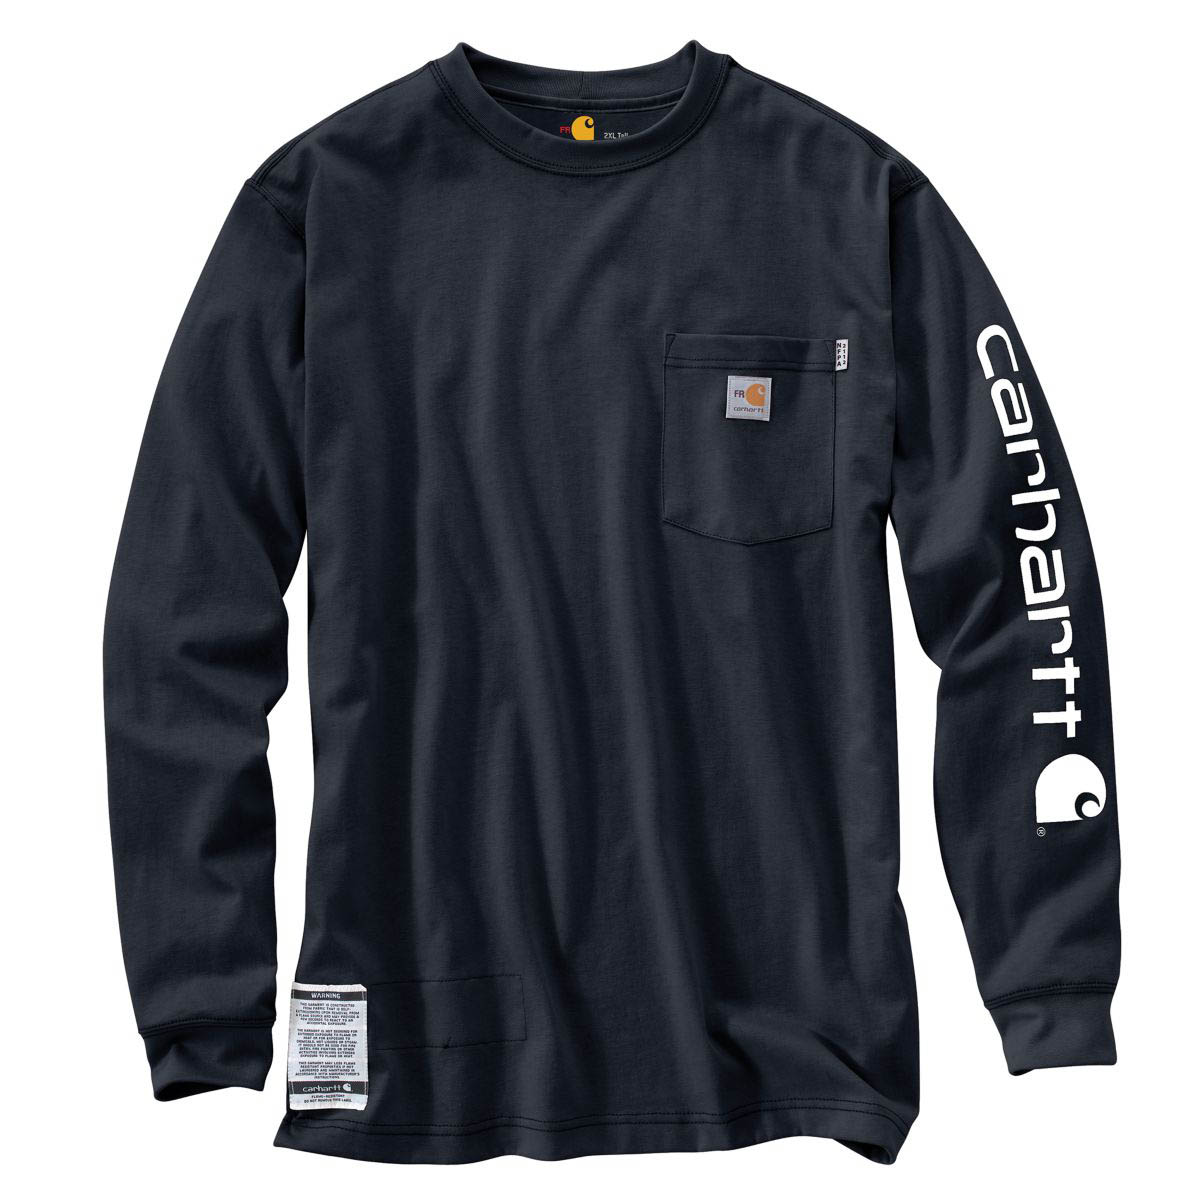 Carhartt Men's Flame Resistant Force Graphic Long Sleeve T Shirt